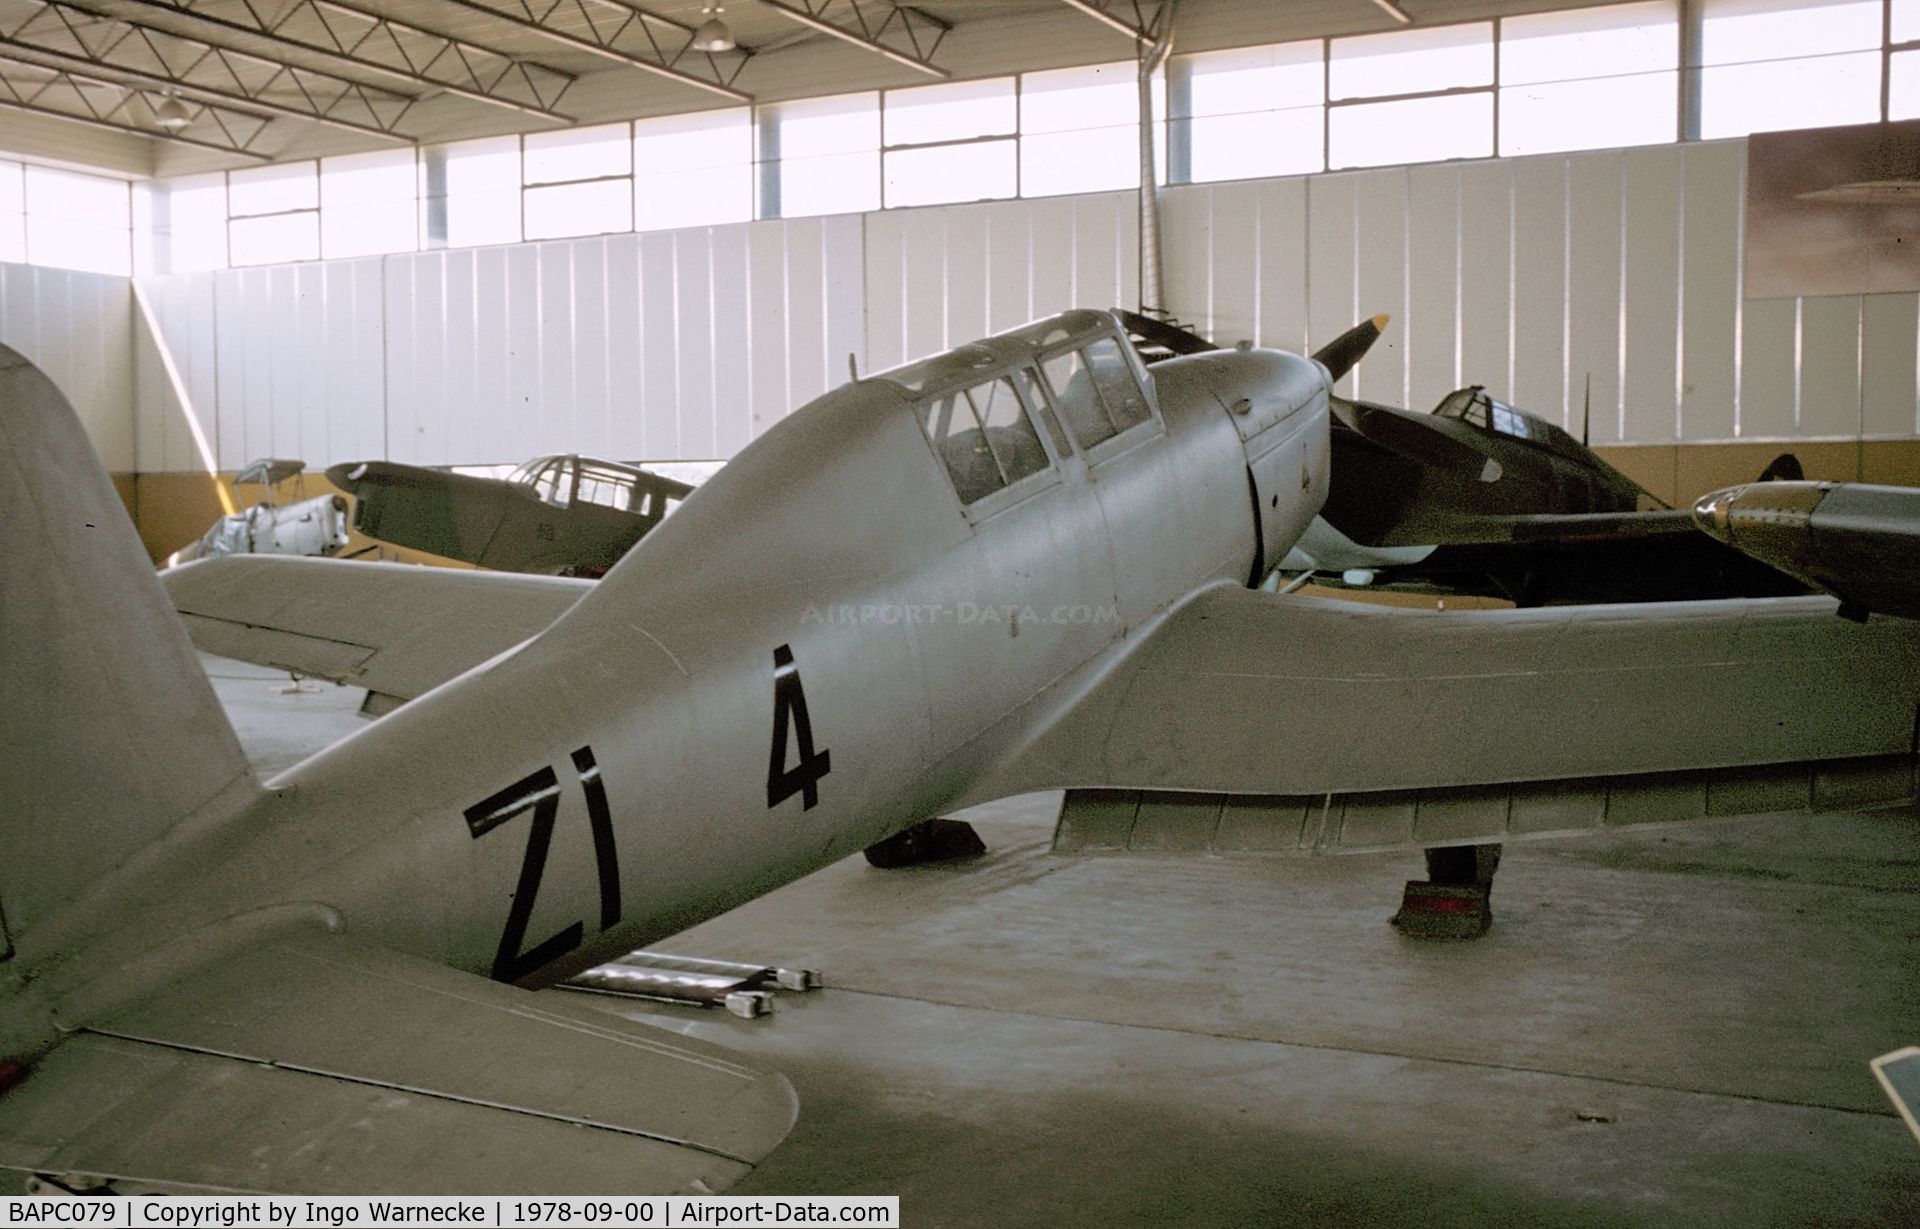 BAPC079, Fiat G.46-4 C/N 106, FIAT G.46-4 at the Historic Aircraft Museum, Southend